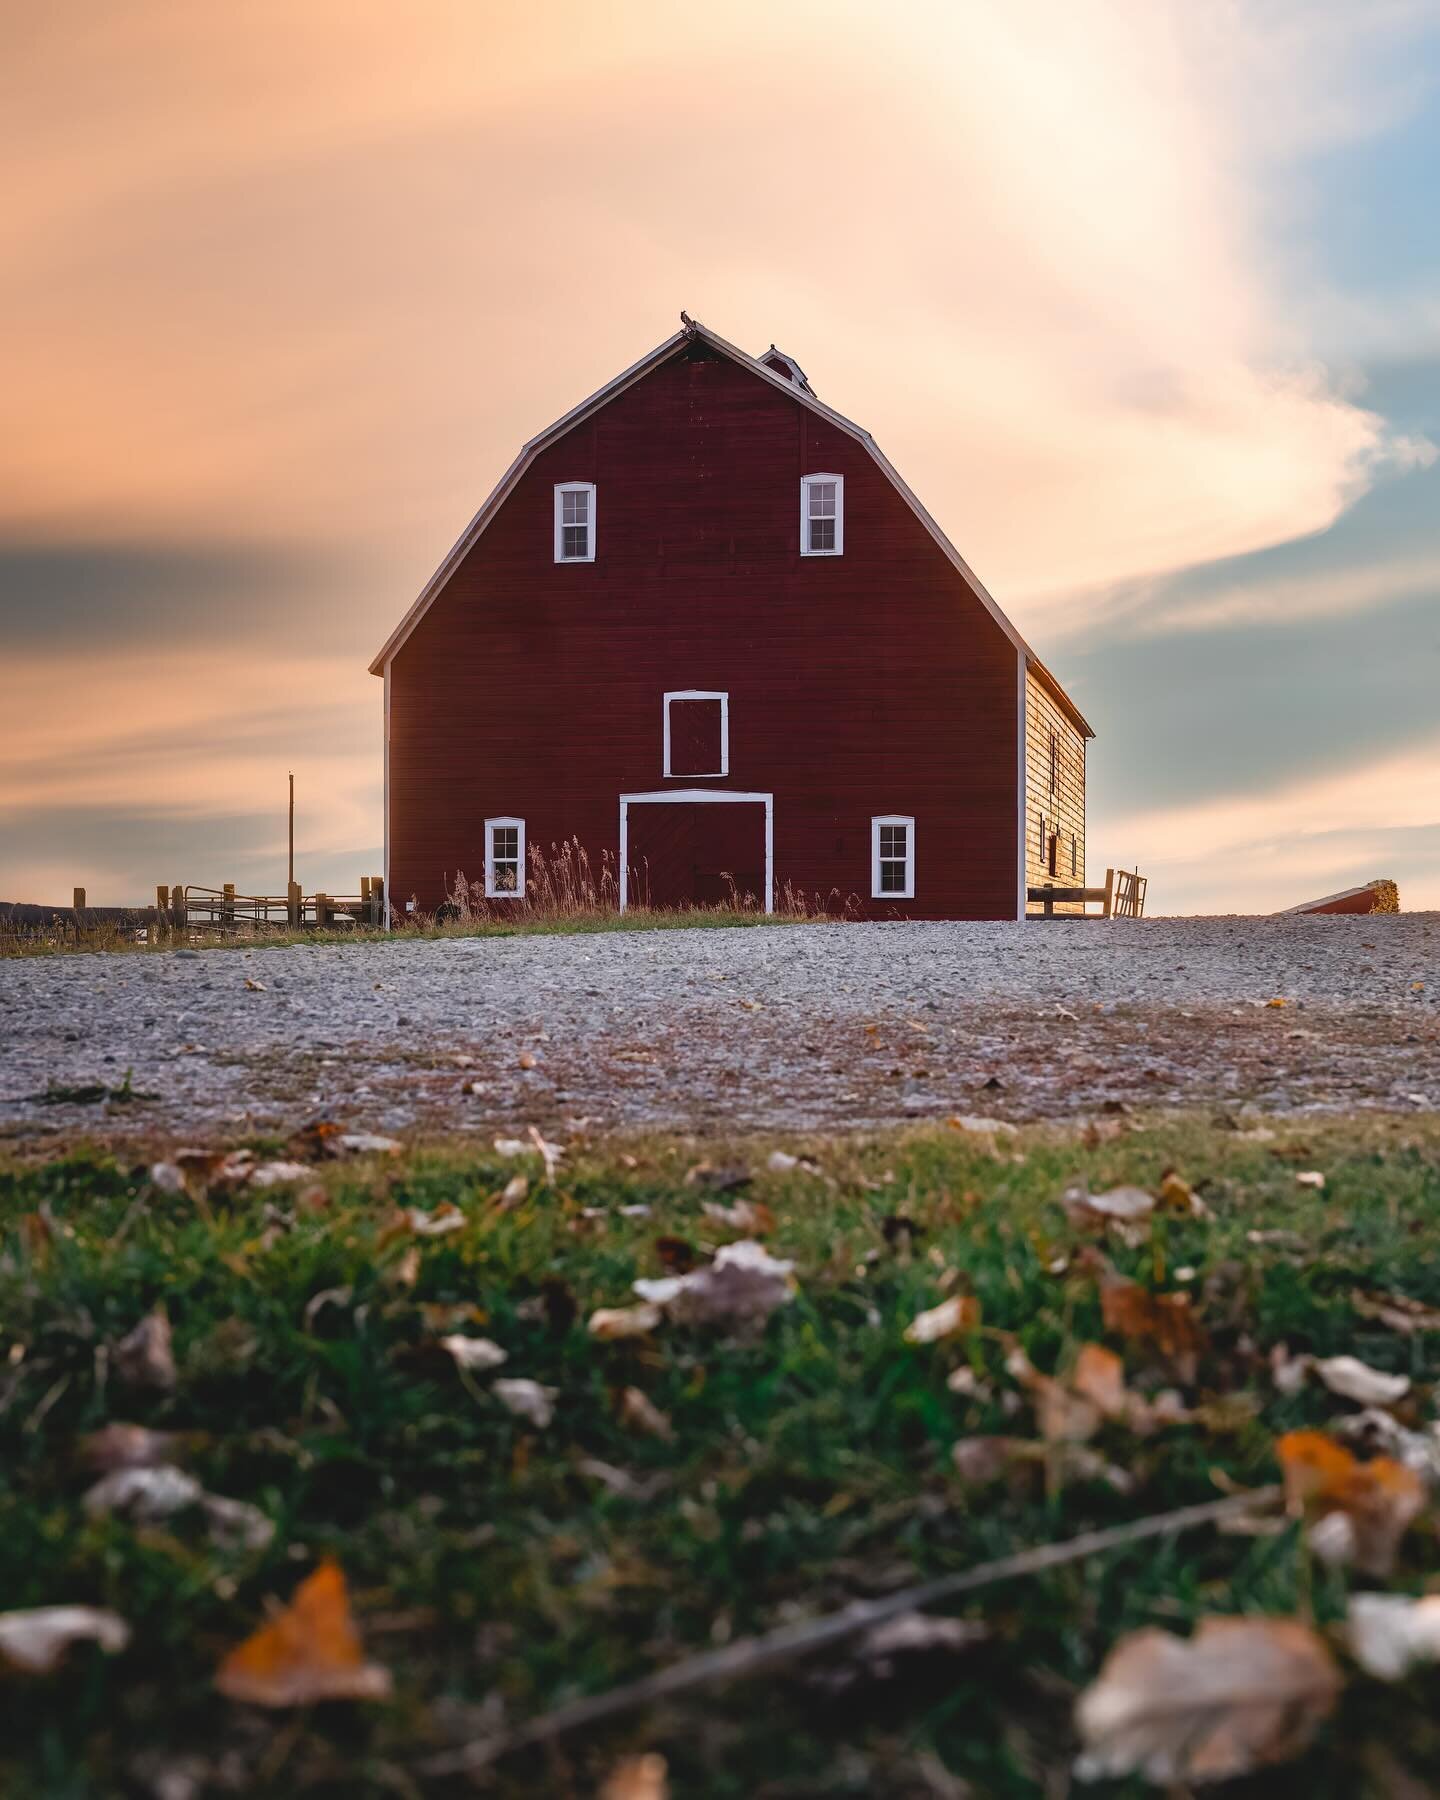 In my relentless quest to diversify my portfolio, I present to you&hellip; yet another barn. Because why break tradition when you&rsquo;re already on a roll, right? Here&rsquo;s to adding another masterpiece to my ever-expanding collection of archite